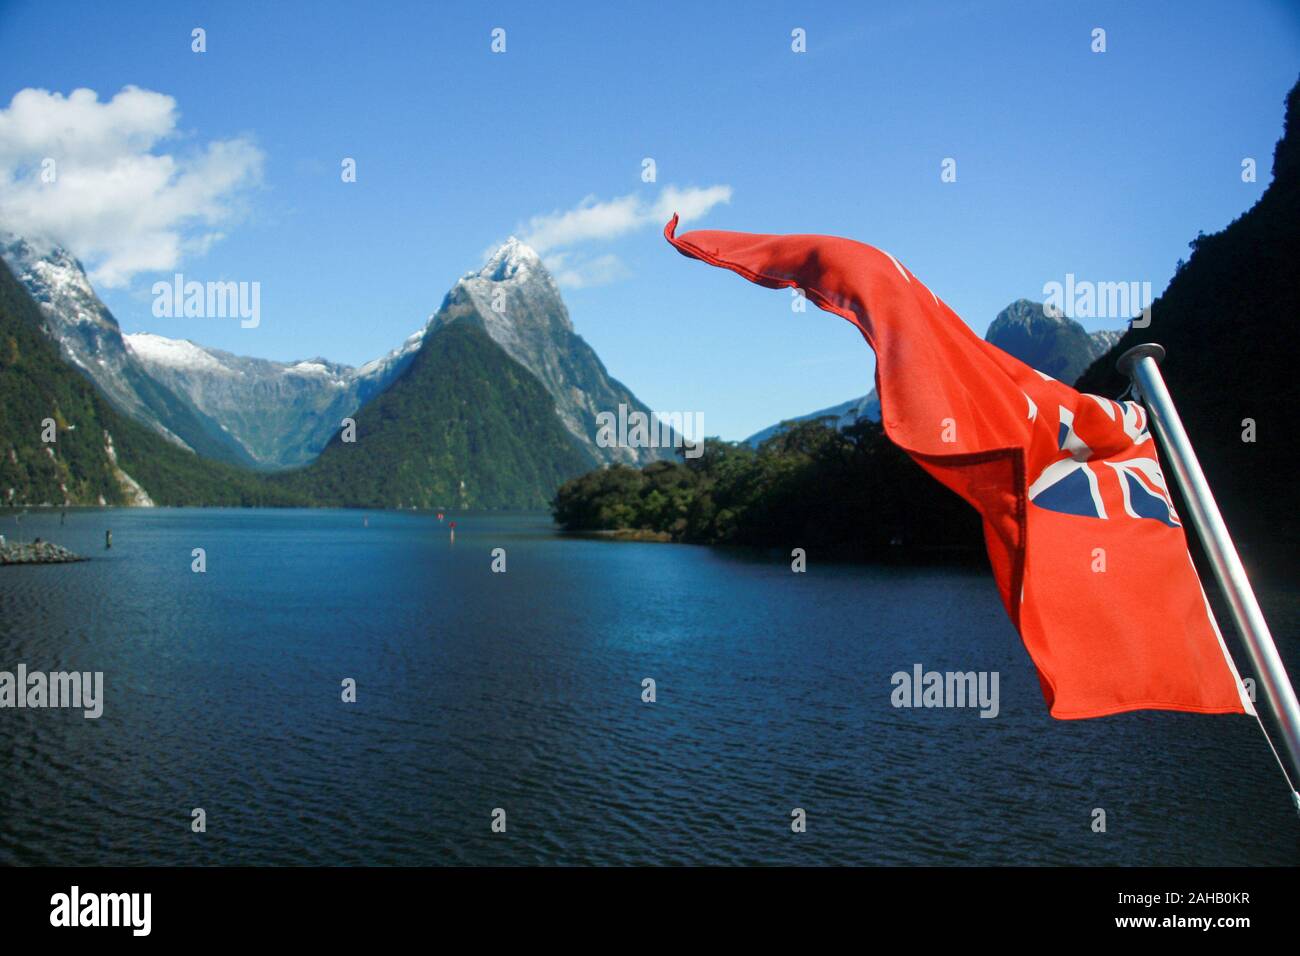 The Red Ensign, a red maritime version of the NZ flag, flutters on a sightseeing ferry boat on the calm, deep blue waters of Milford Sound in the remote Fiordland region in New Zealand's South Stock Photo